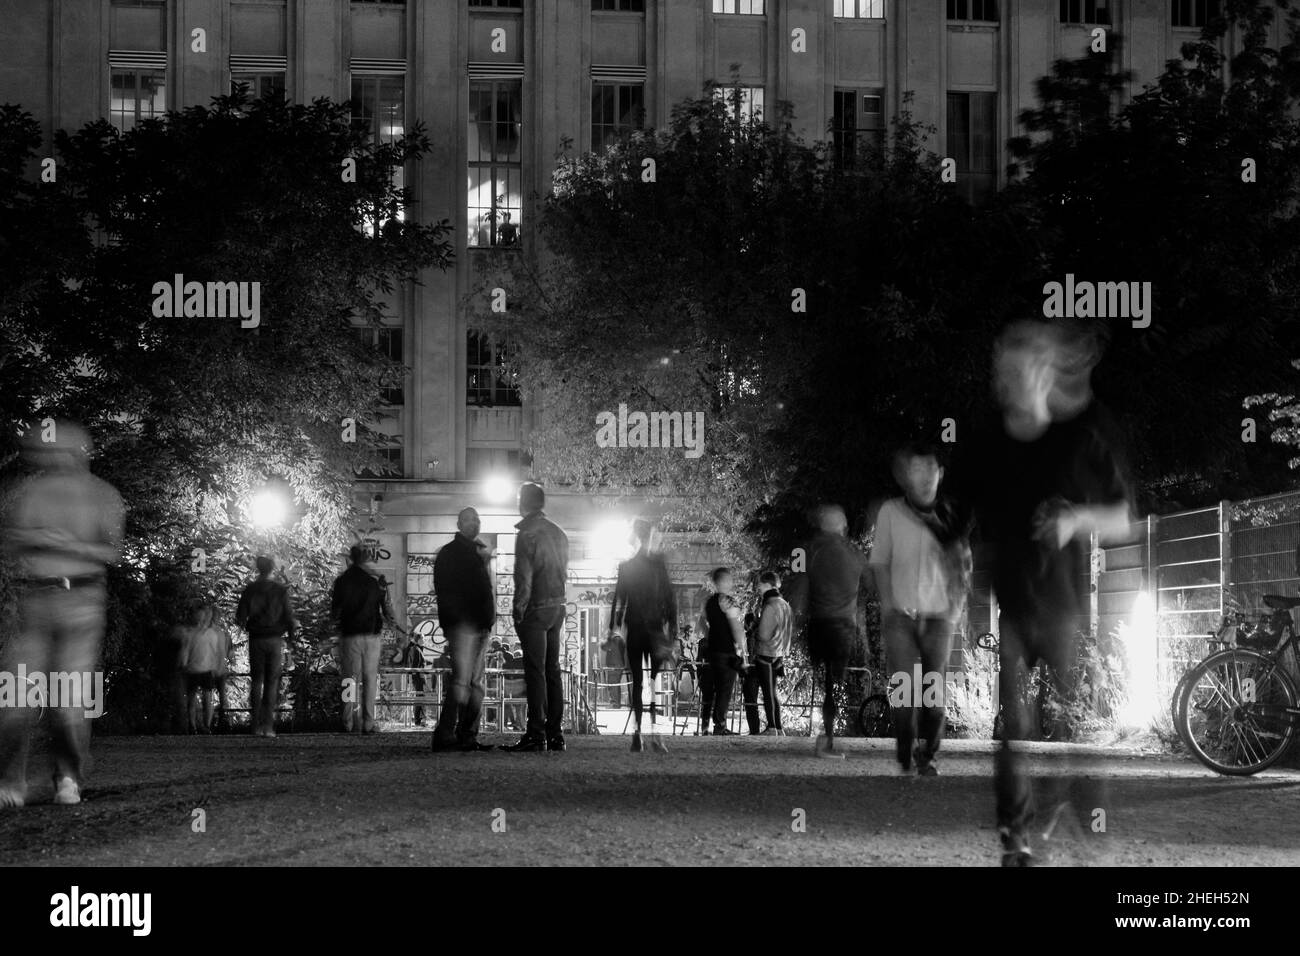 Berghain Nightclub Berlin High Resolution Stock Photography and Images -  Alamy